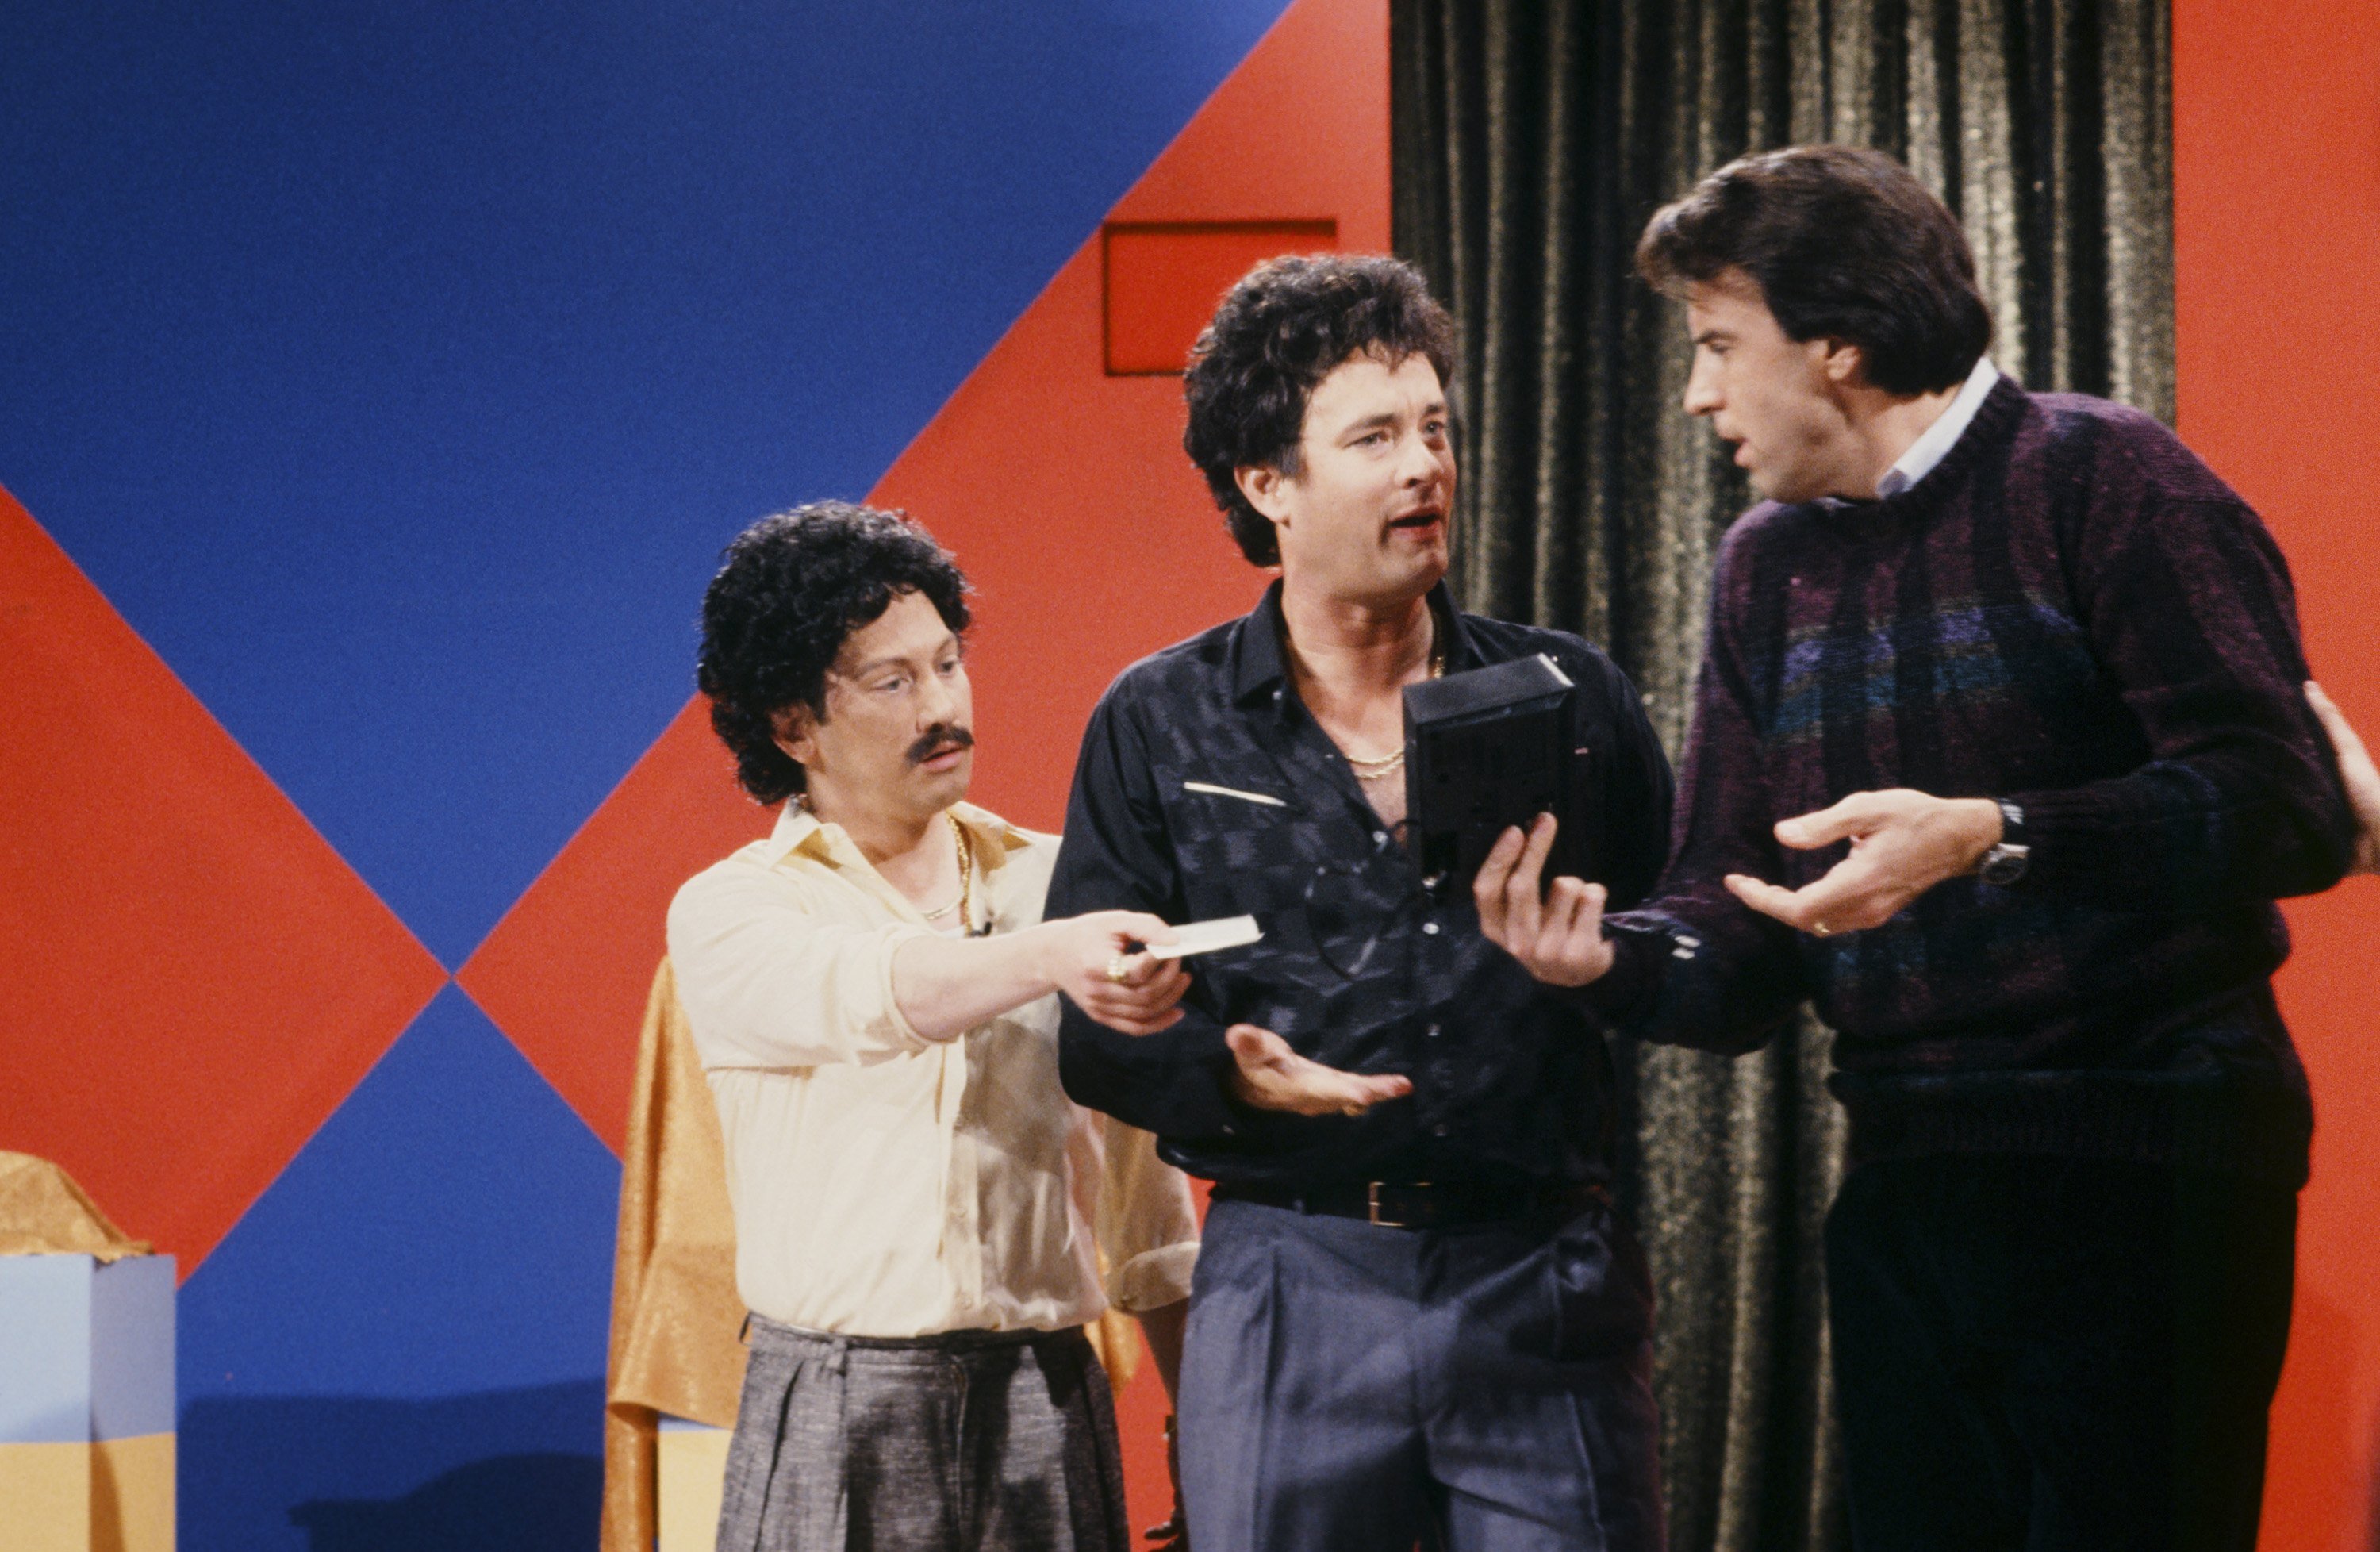 Tom Hanks on 'Saturday Night Live' hosts 'Sabra Price is Right' with Rob Schneider and Kevin Nealon